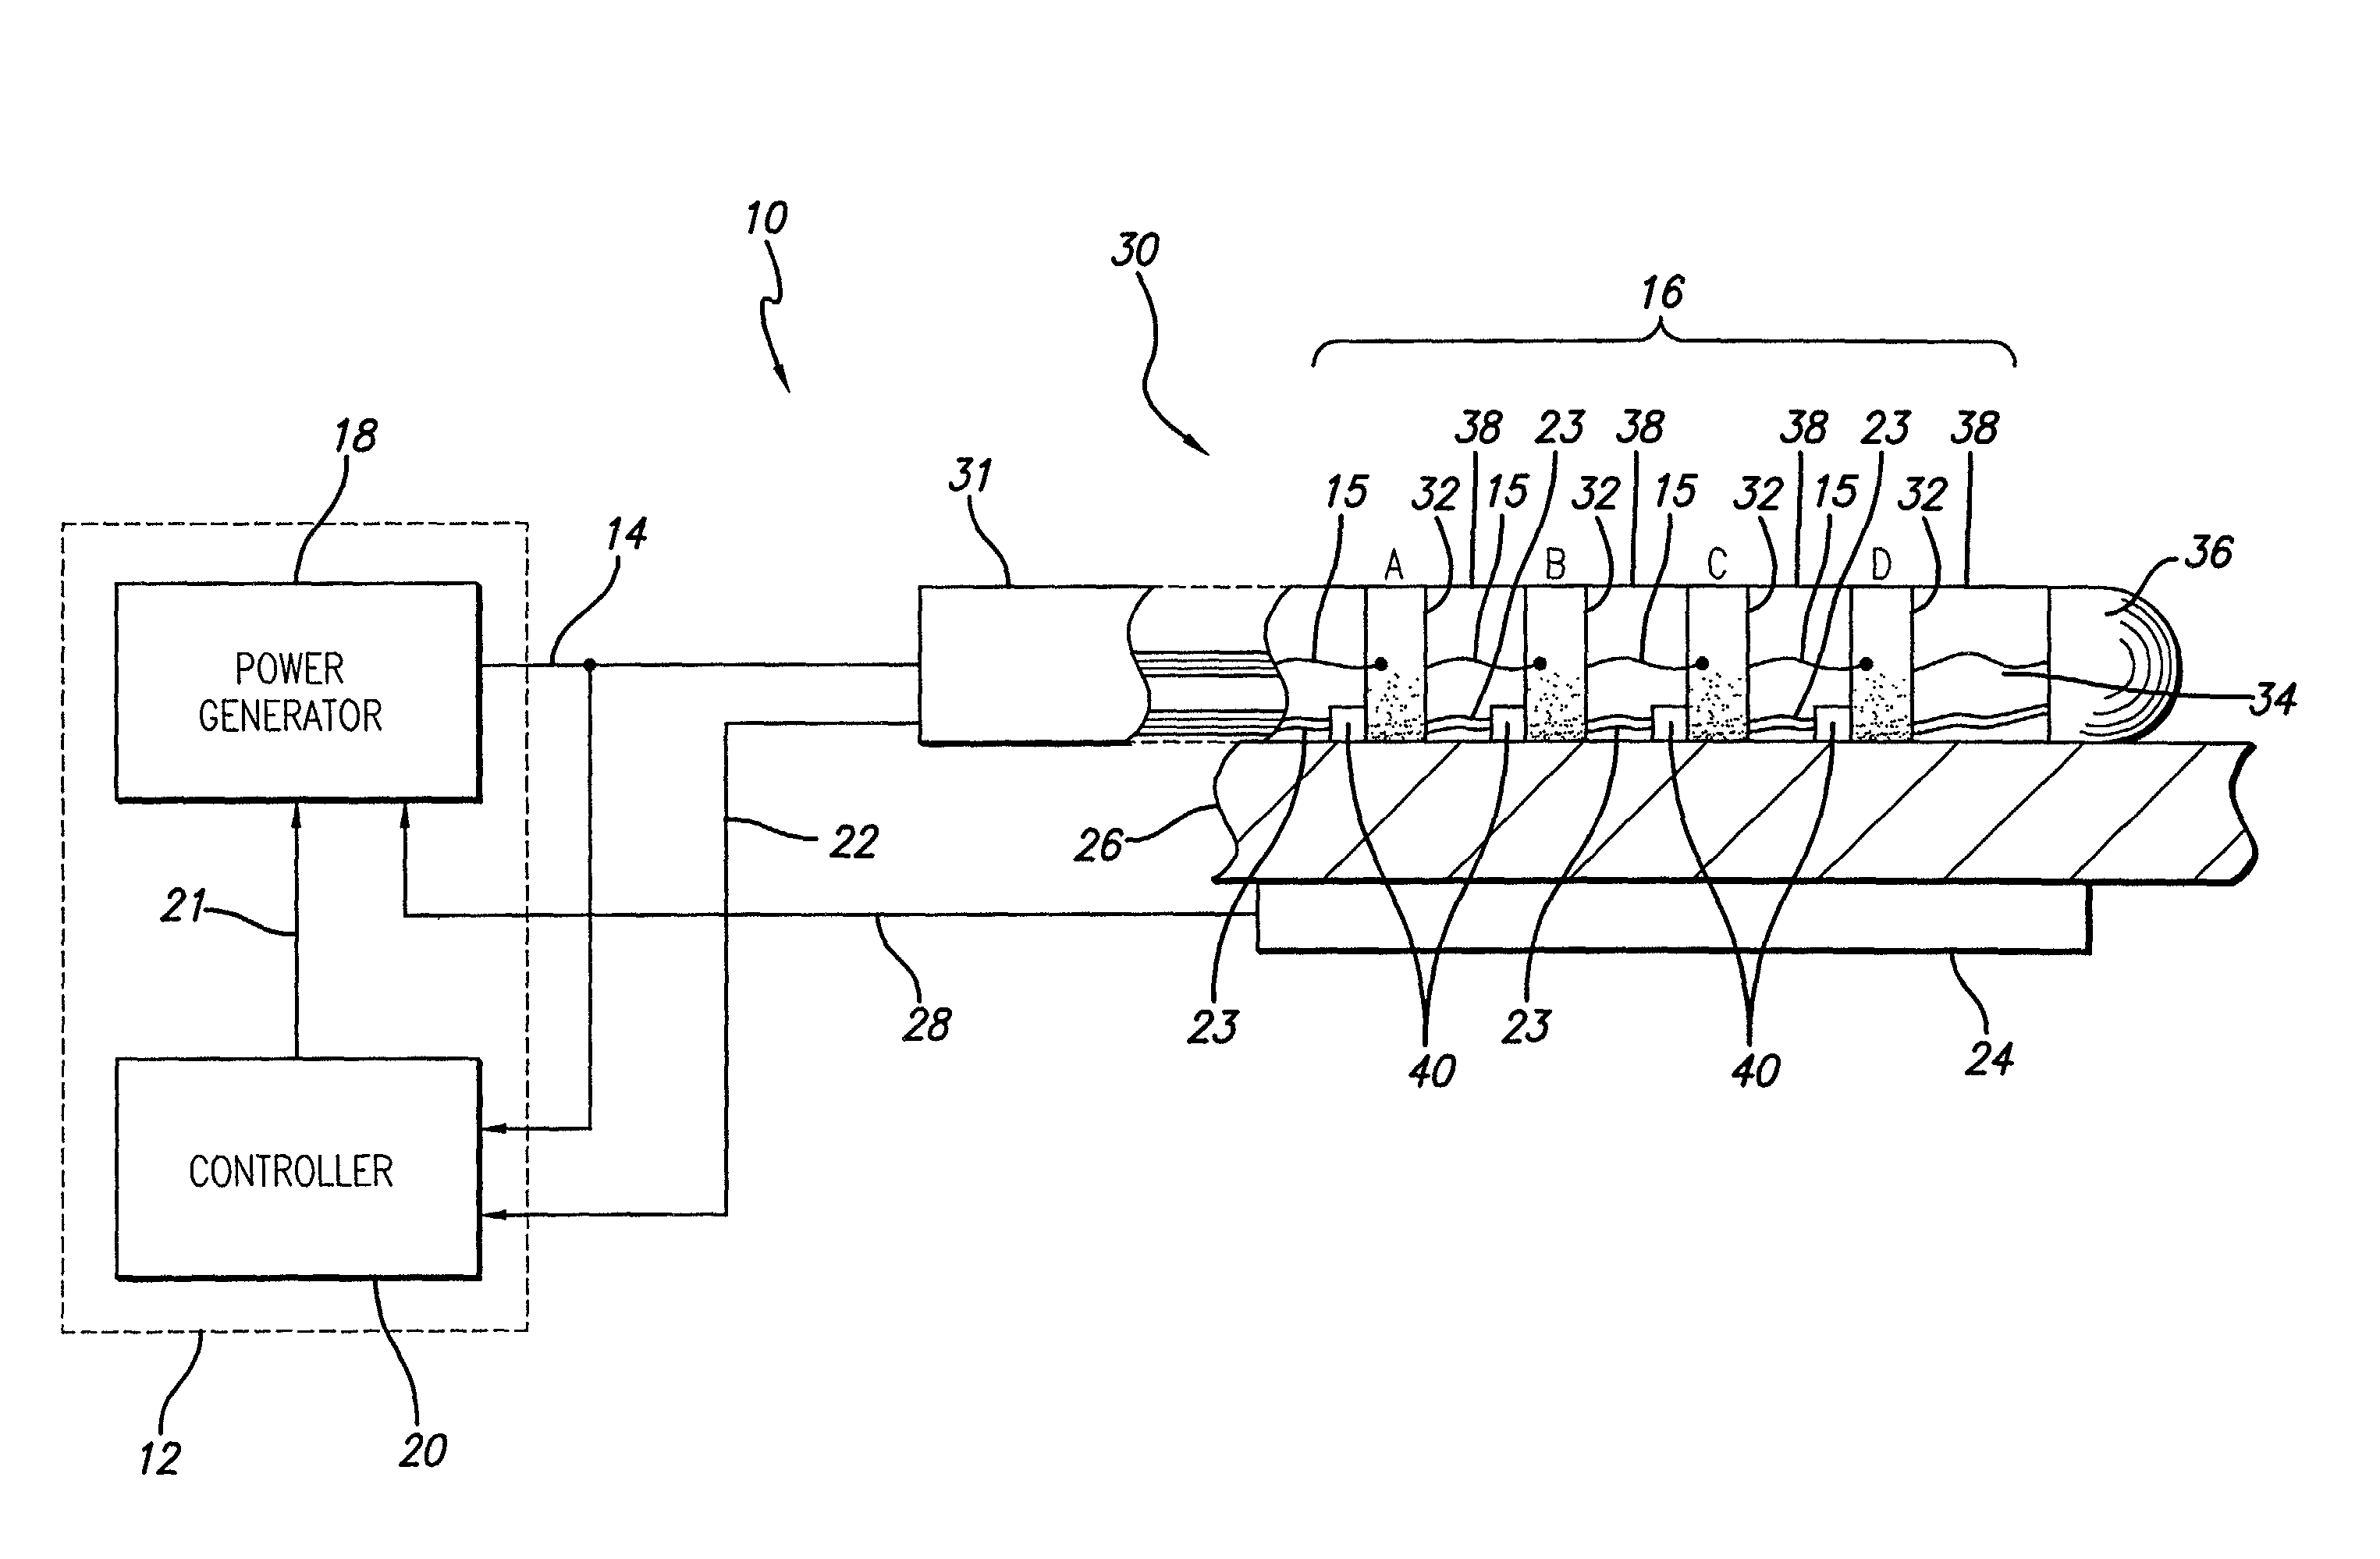 Ablation system and method having multiple-sensor electrodes to assist in assessment of electrode and sensor position and adjustment of energy levels